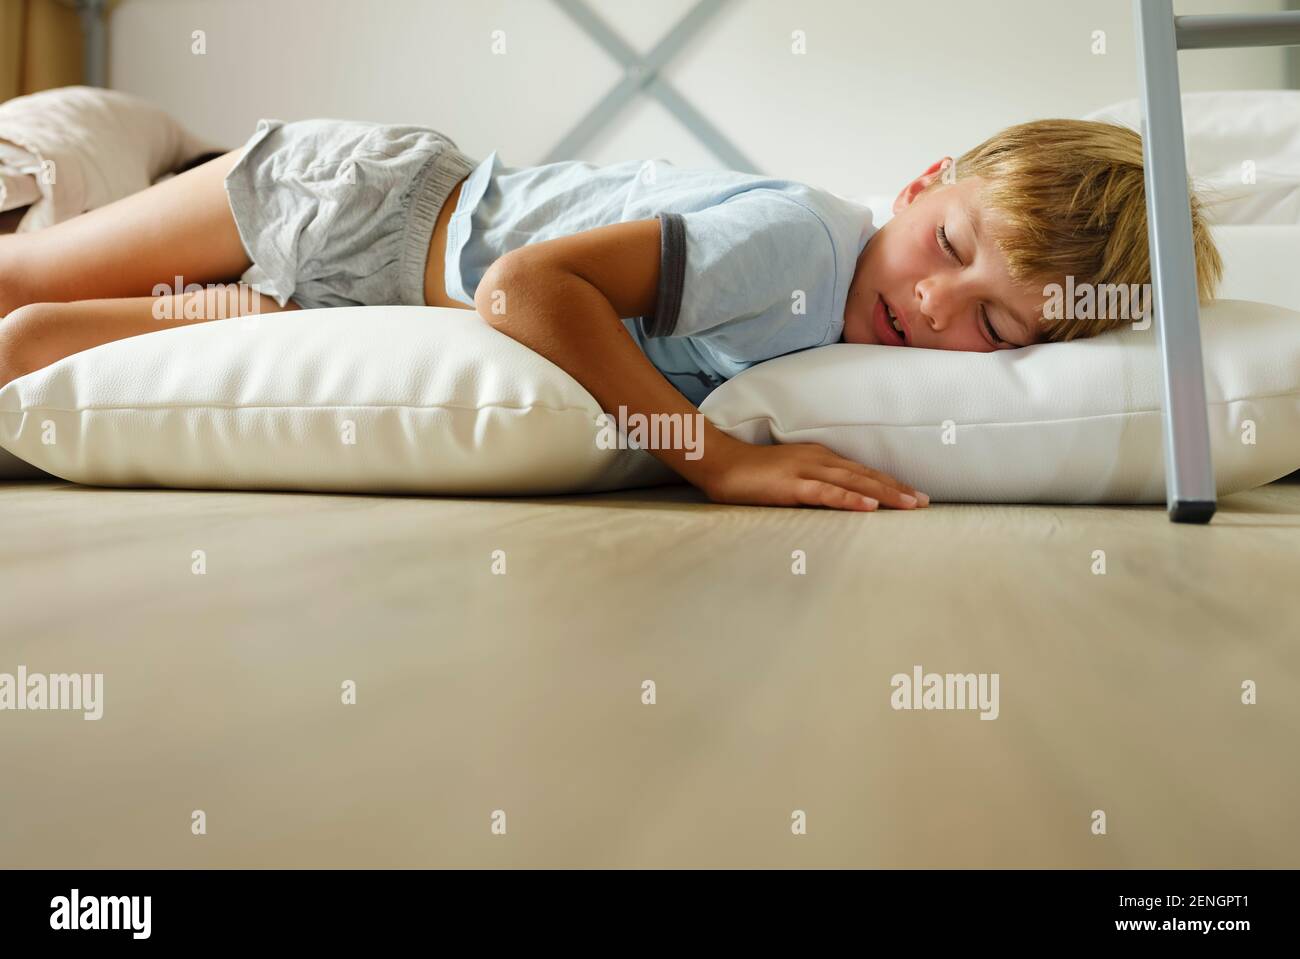 Child in pajamas sleeping in his bed without blankets, illuminated